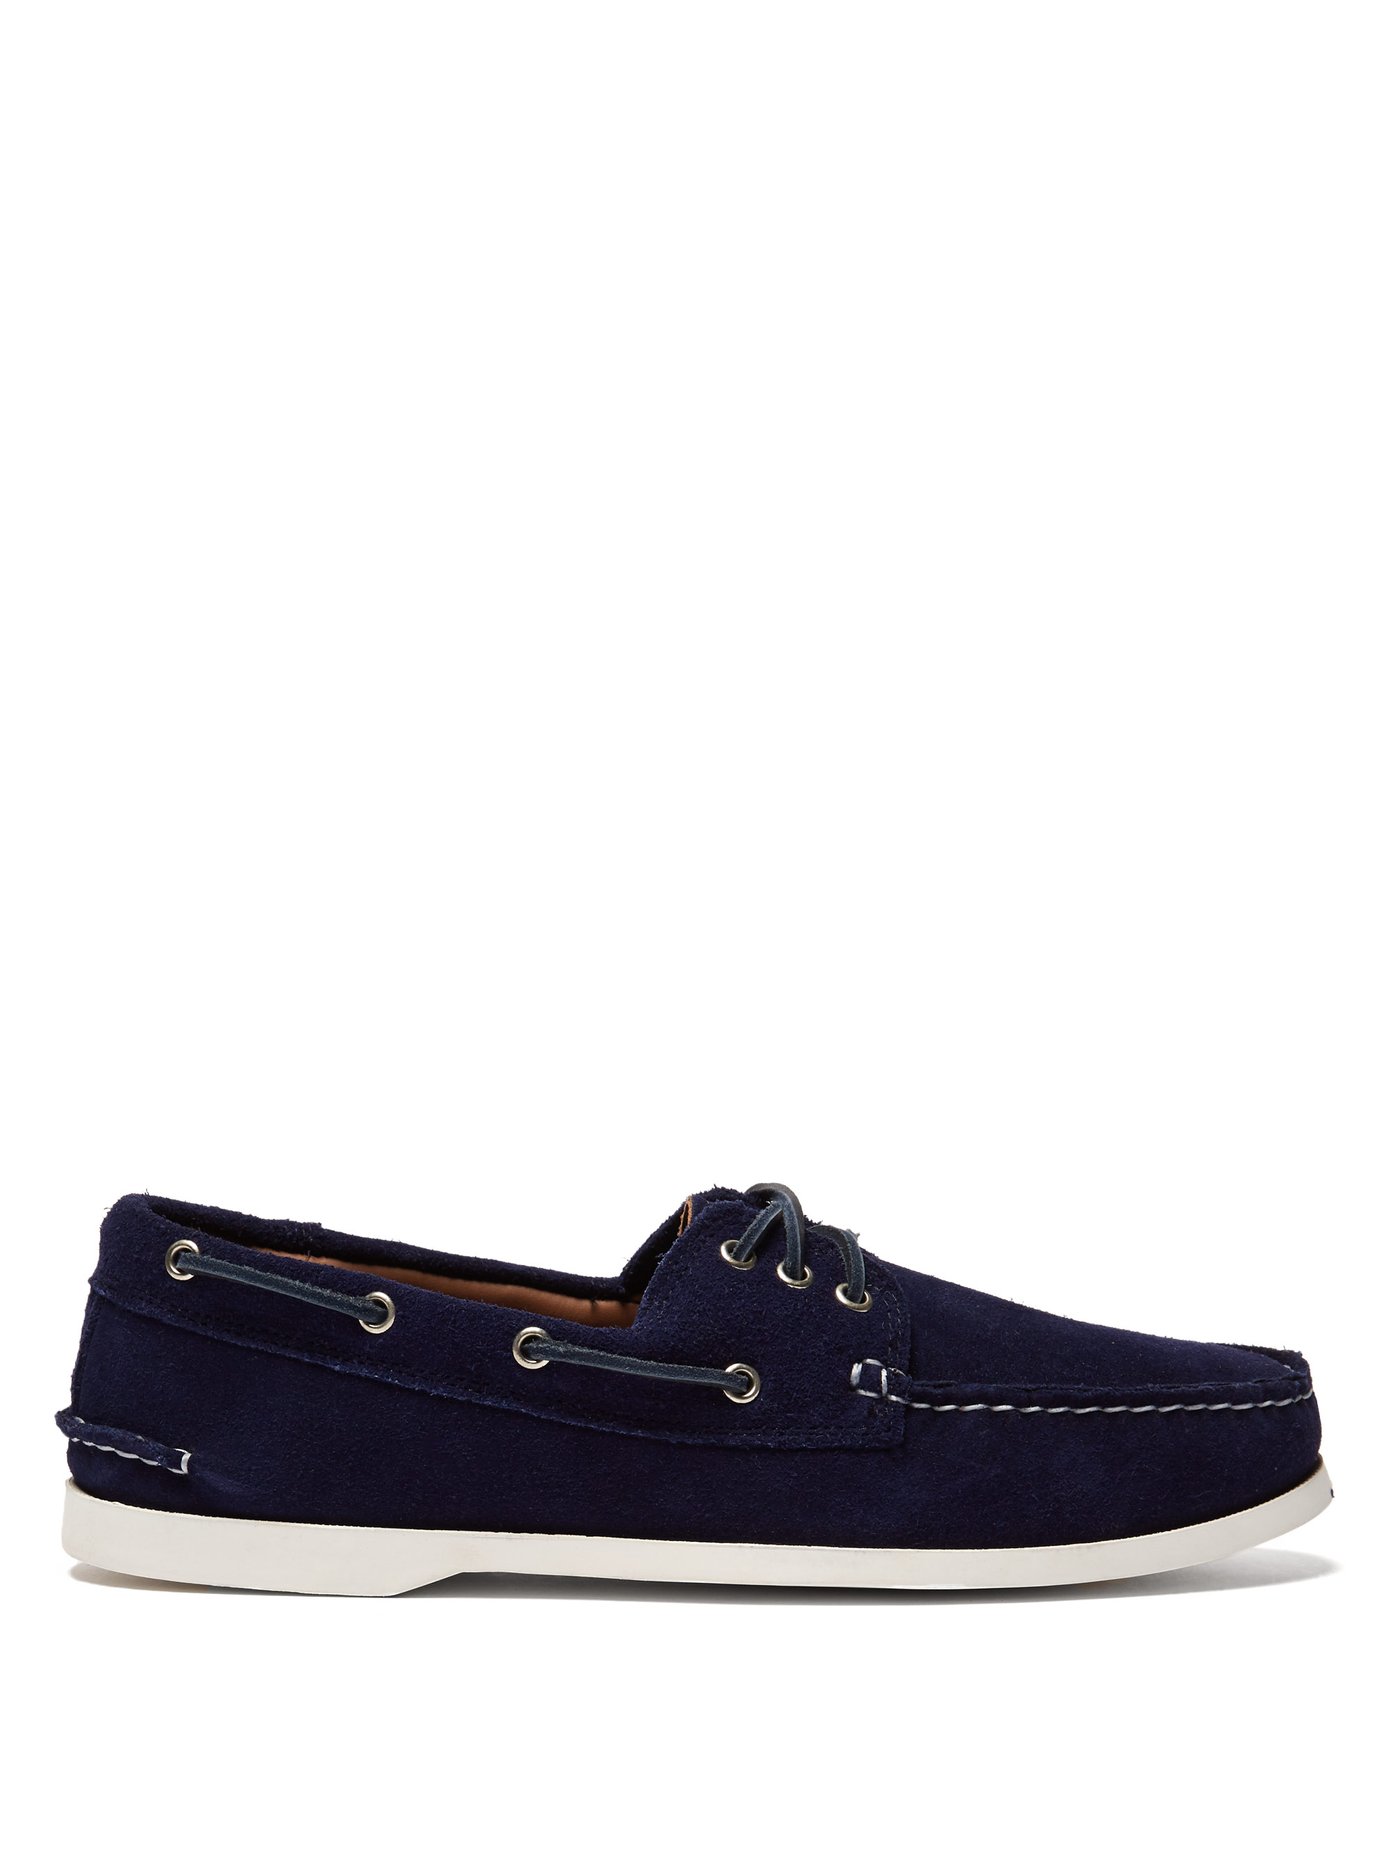 valentino boat shoes